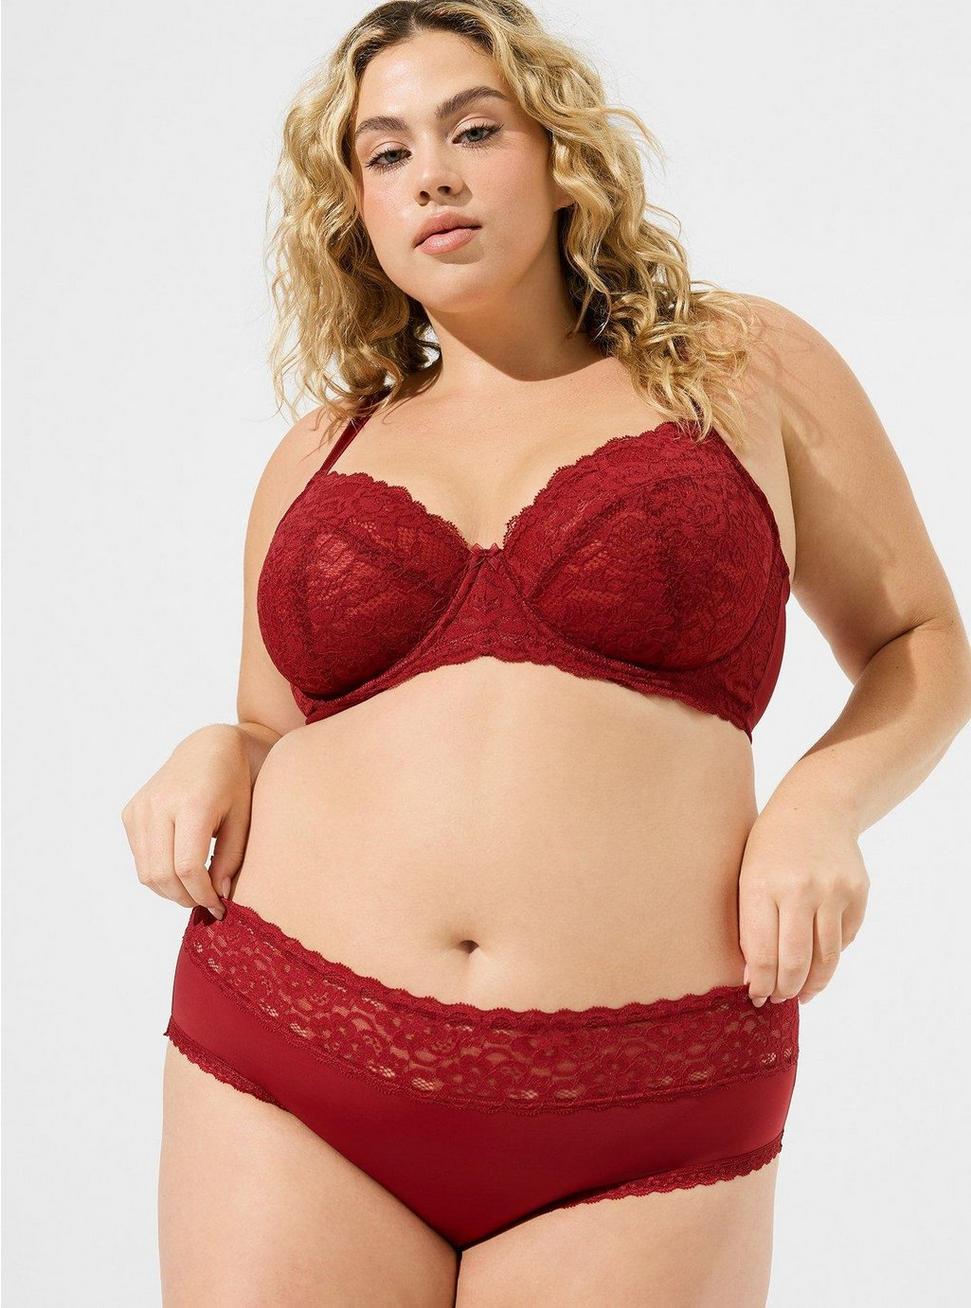 Second Skin Mid-Rise Hipster Lace Trim Panty, RHUBARB, hi-res